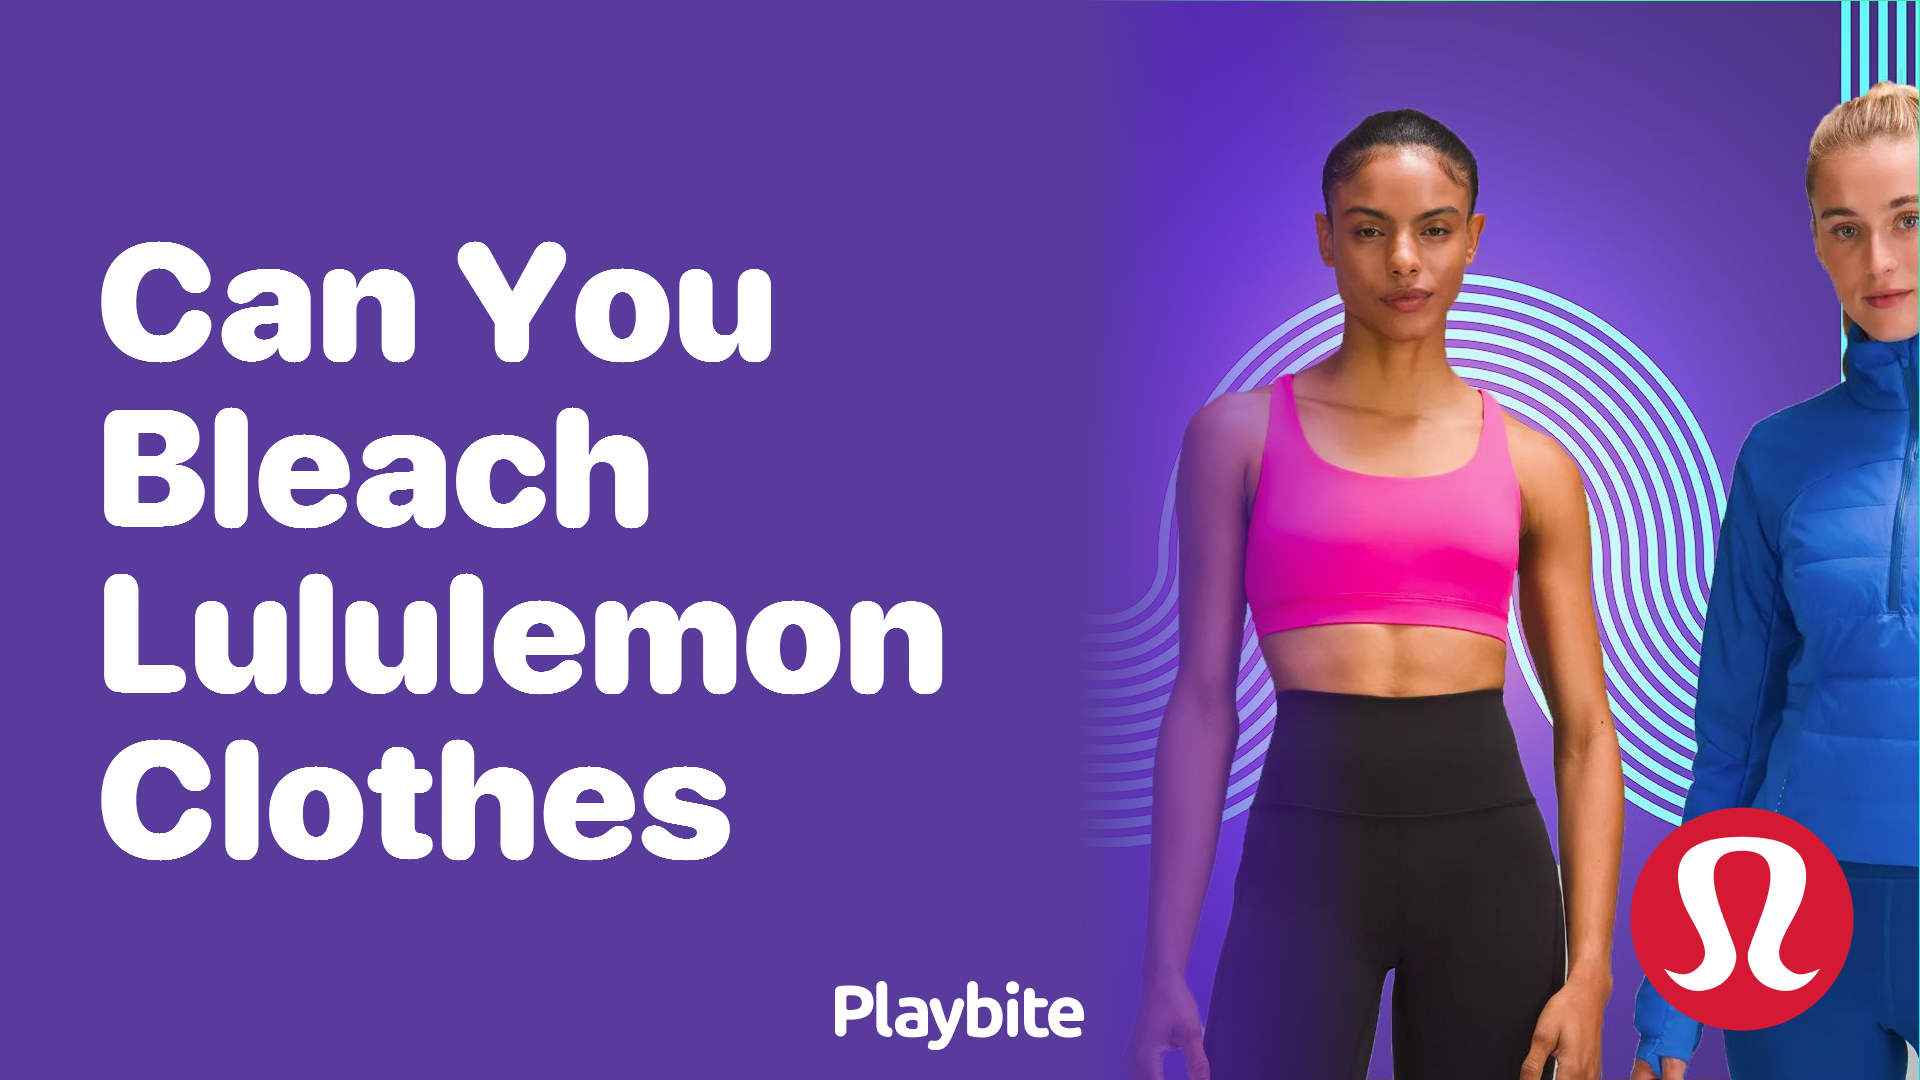 How Is Lululemon Different From Other Sportswear Companies? - Playbite